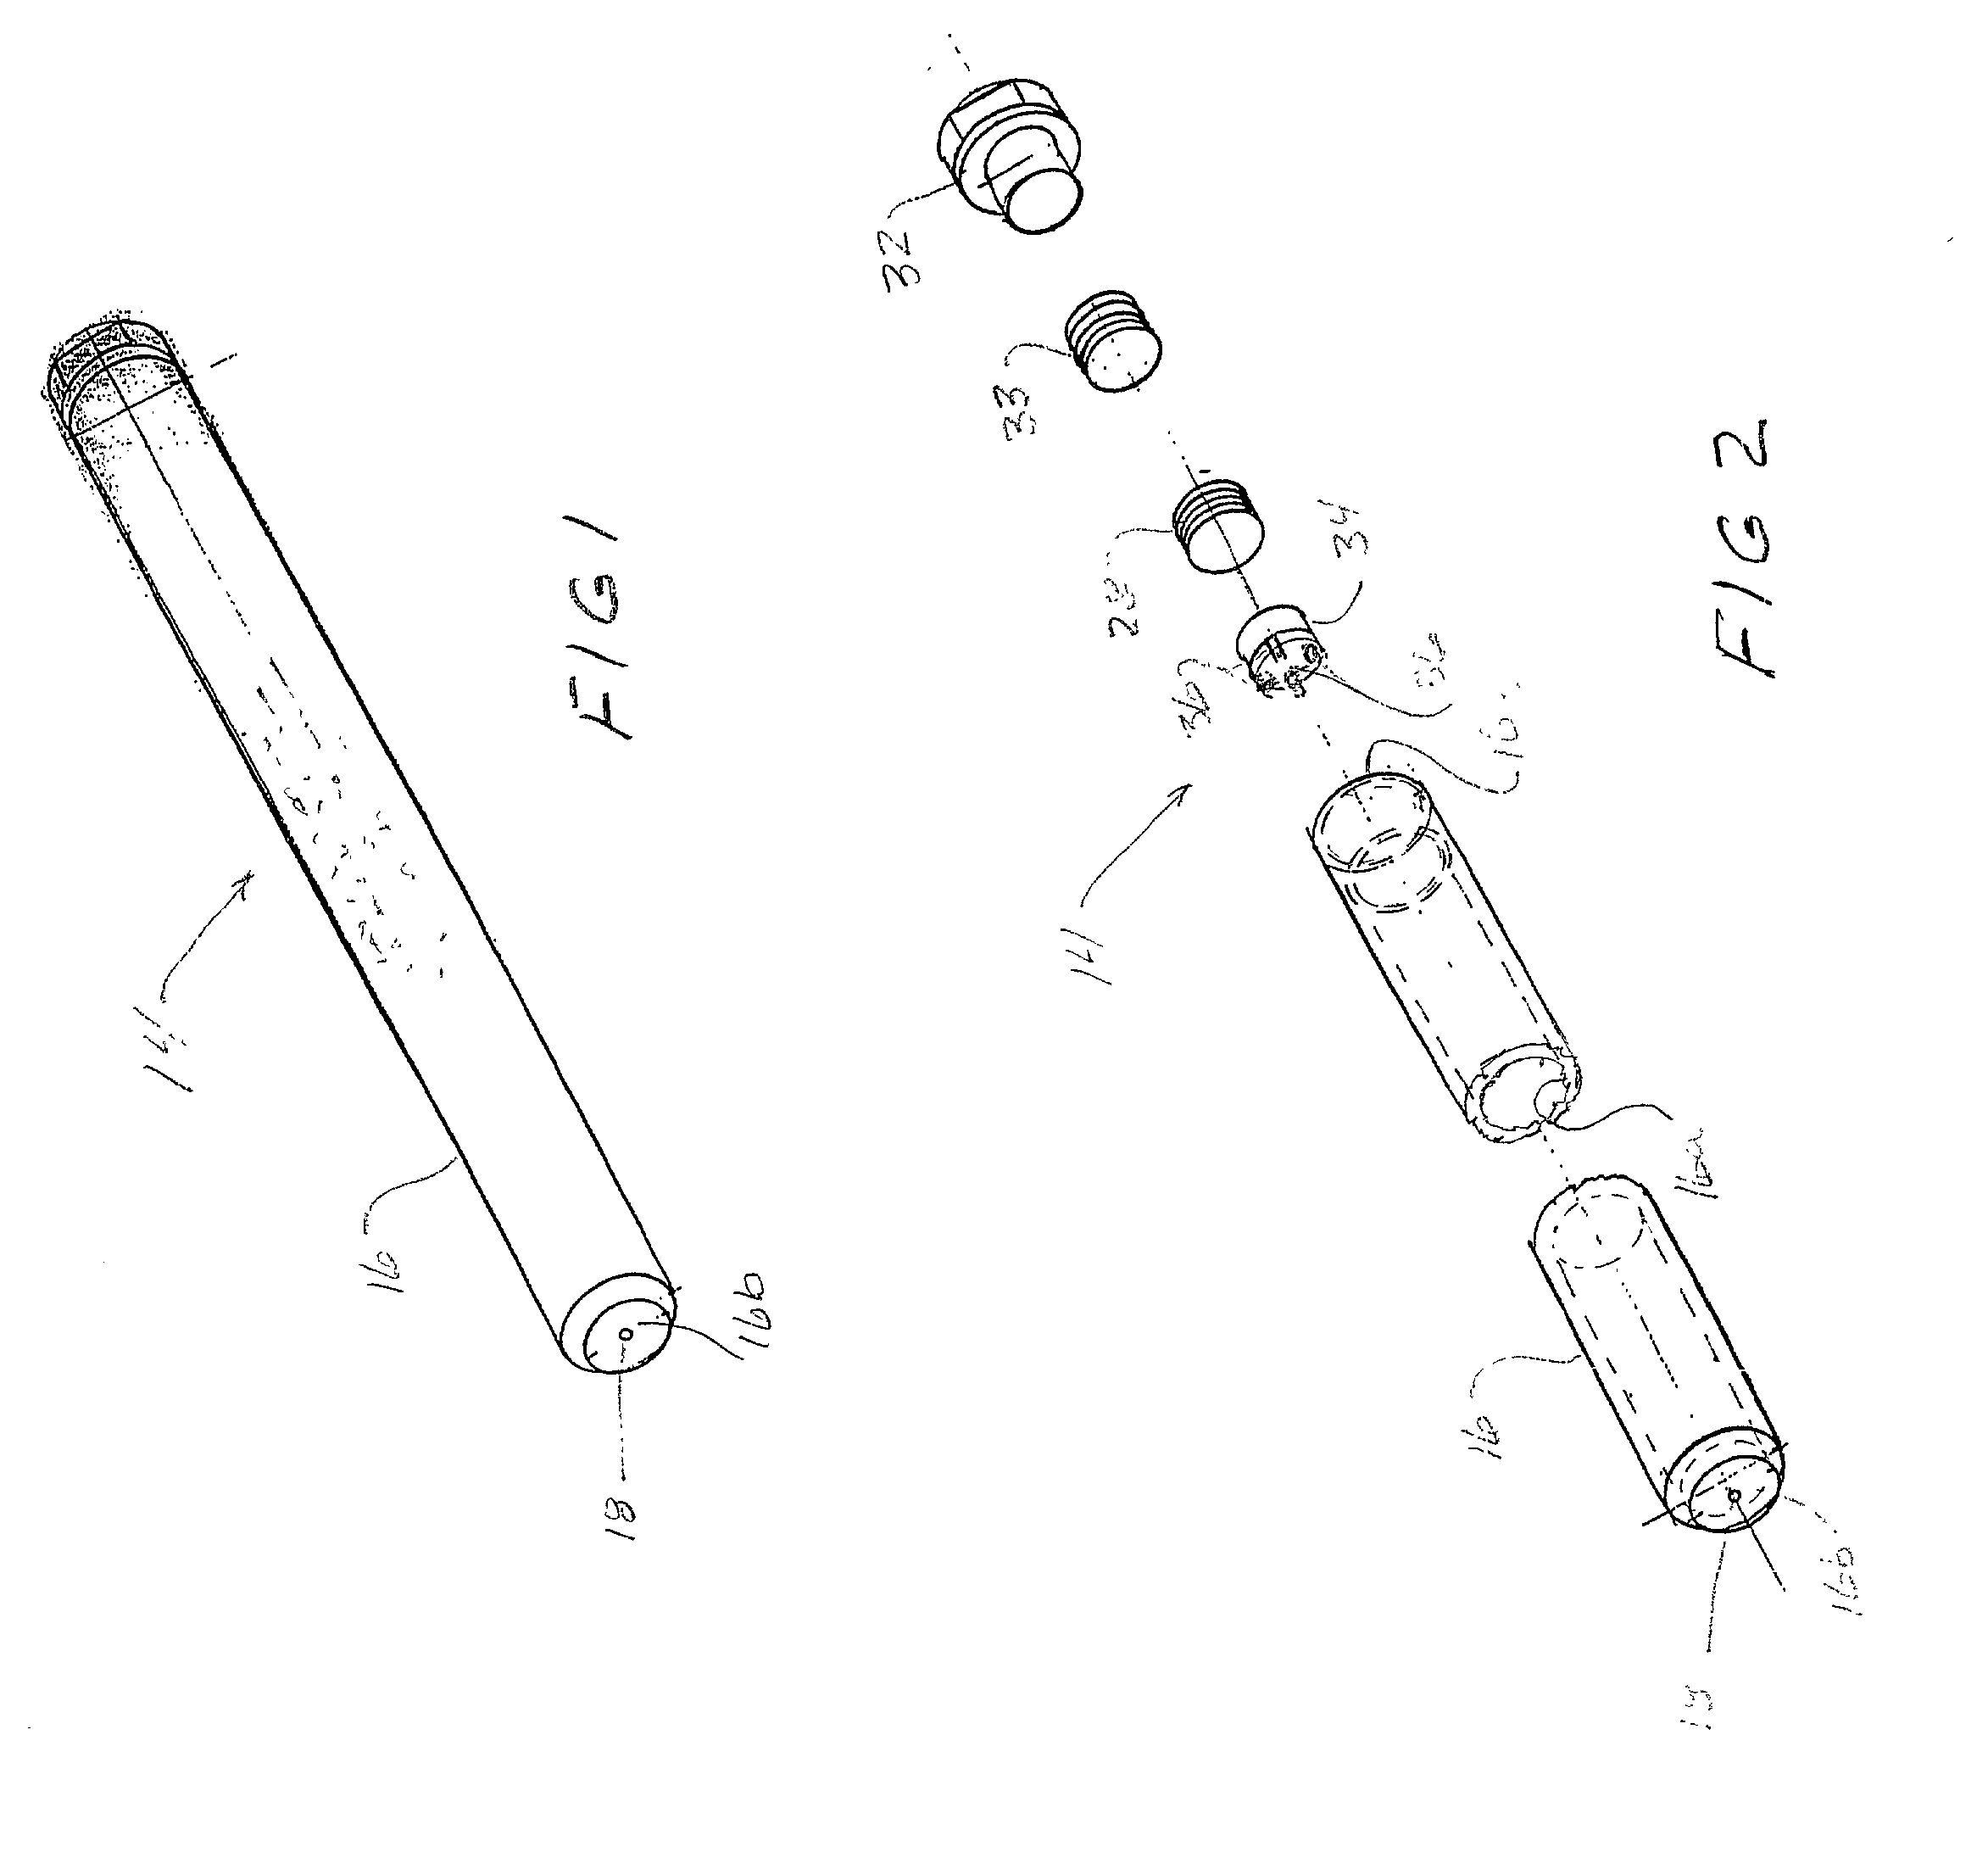 Implantable dispensing device for controllably dispensing medicinal fluid